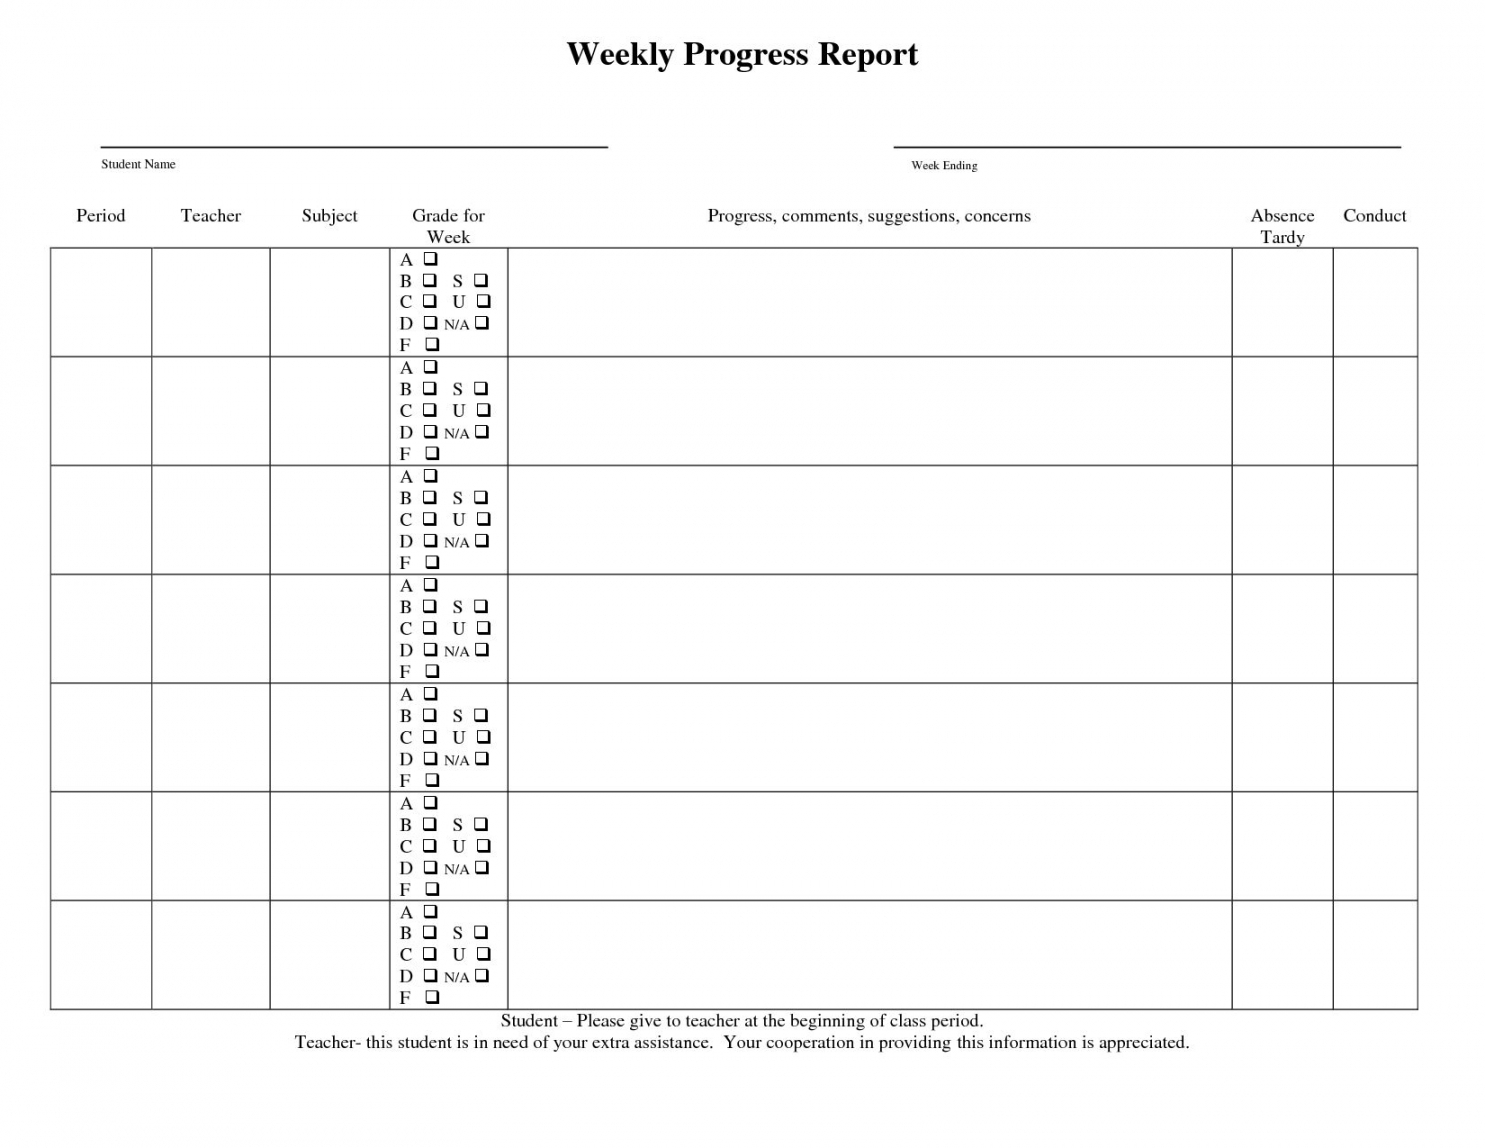 Daily Progress Report Format Excel Construction Glendale In Student Progress Report Template